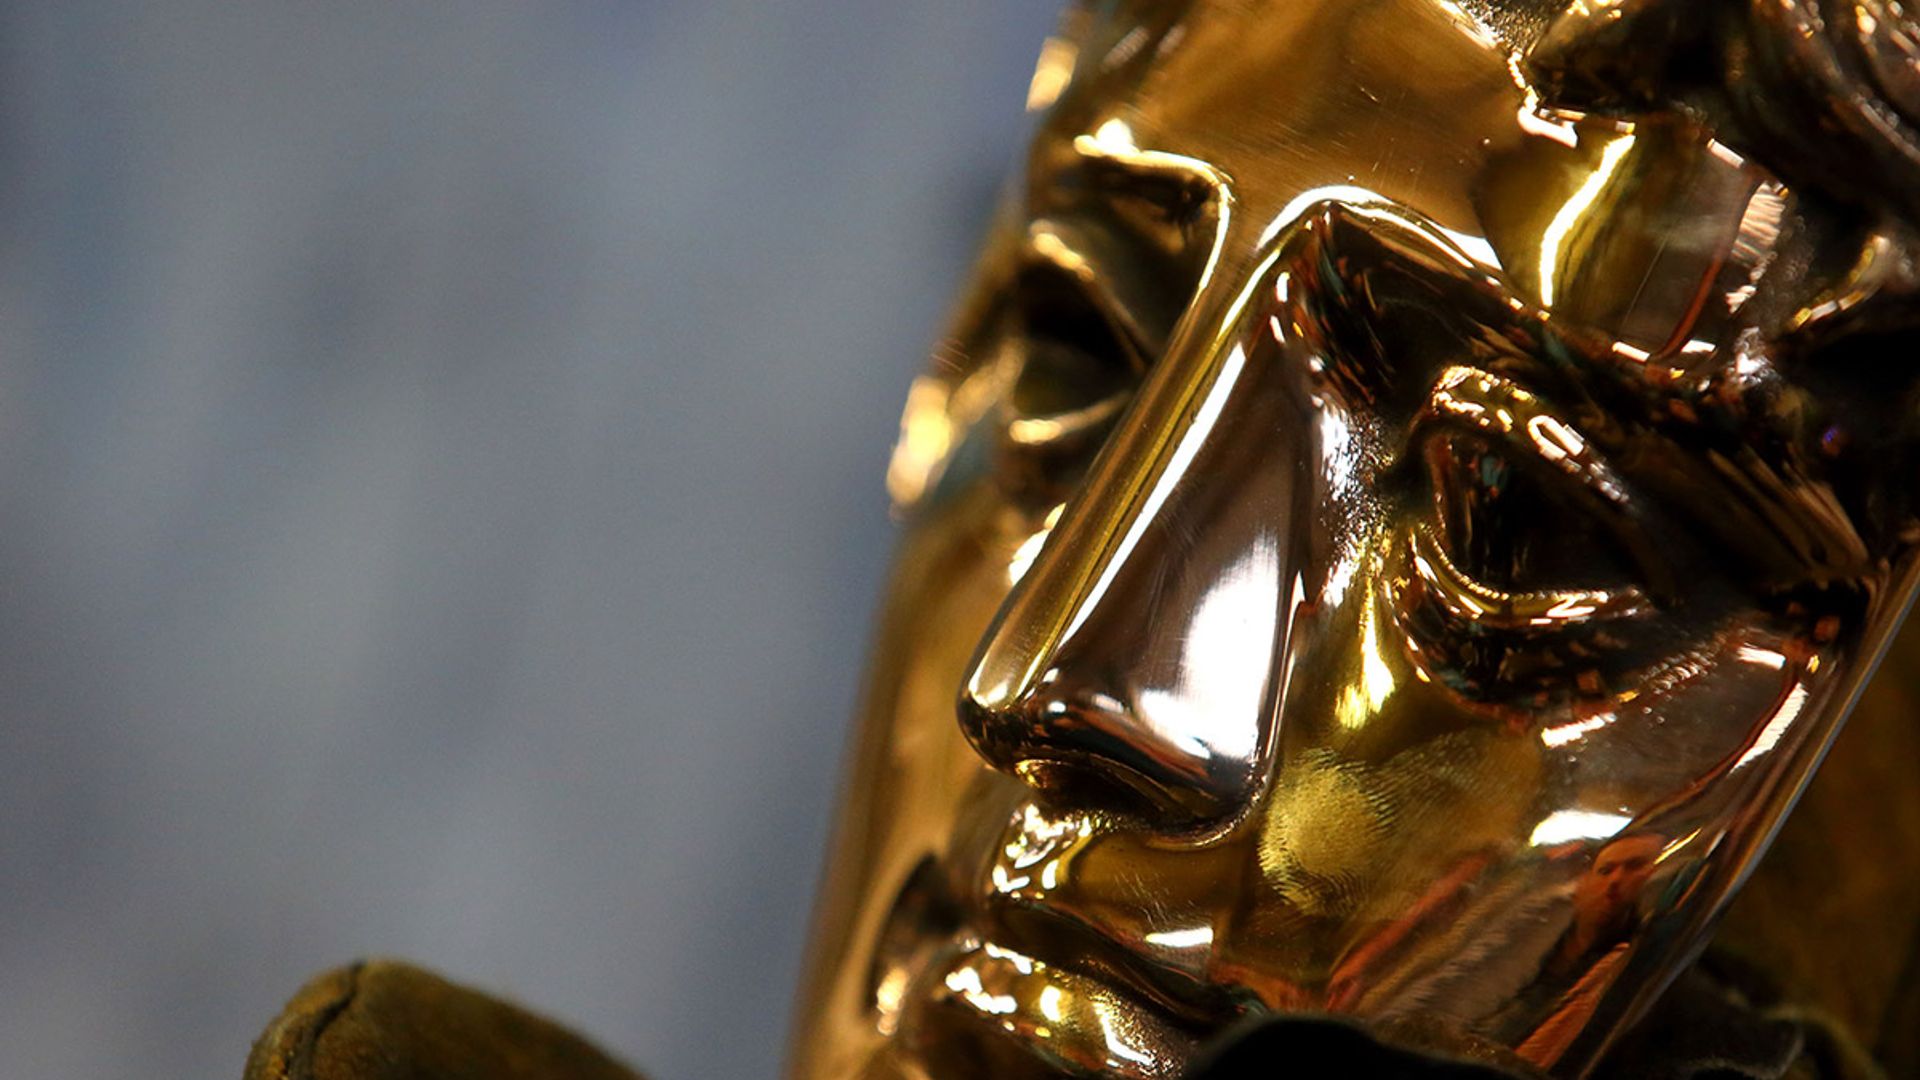 BAFTA winners revealed - find out who was awarded on the night